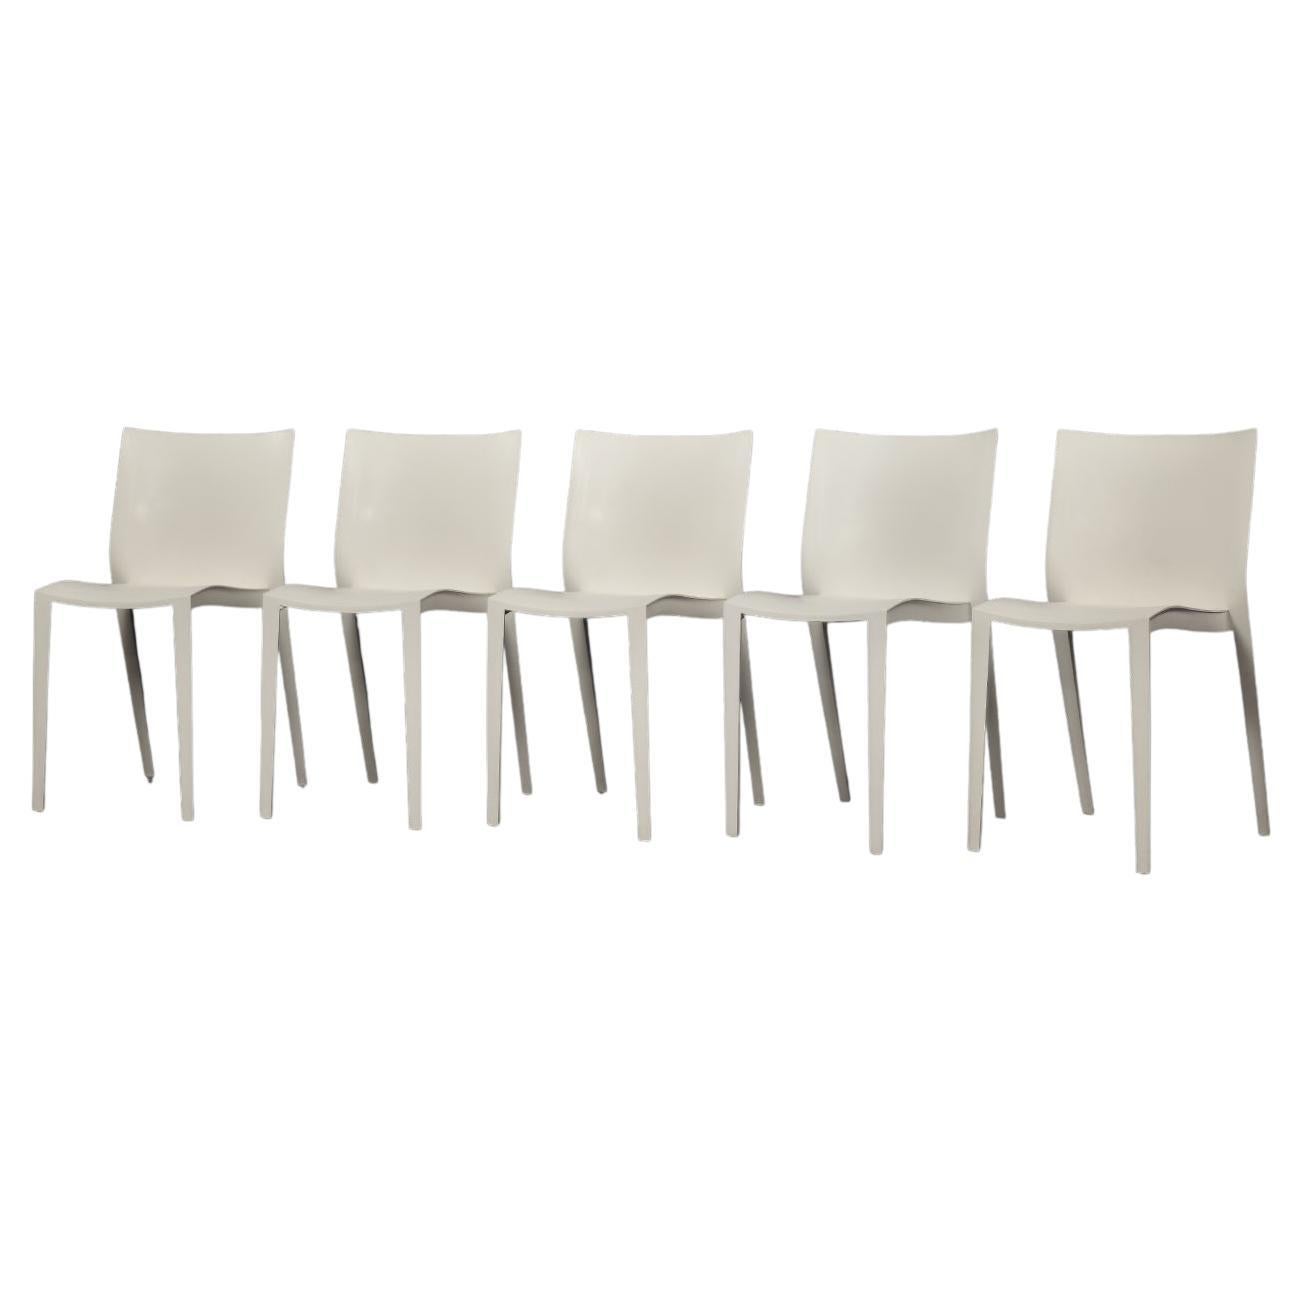 Set of 5 Vintage Midcentury French Modern Slickslick Chairs by Philippe  Starck For Sale at 1stDibs